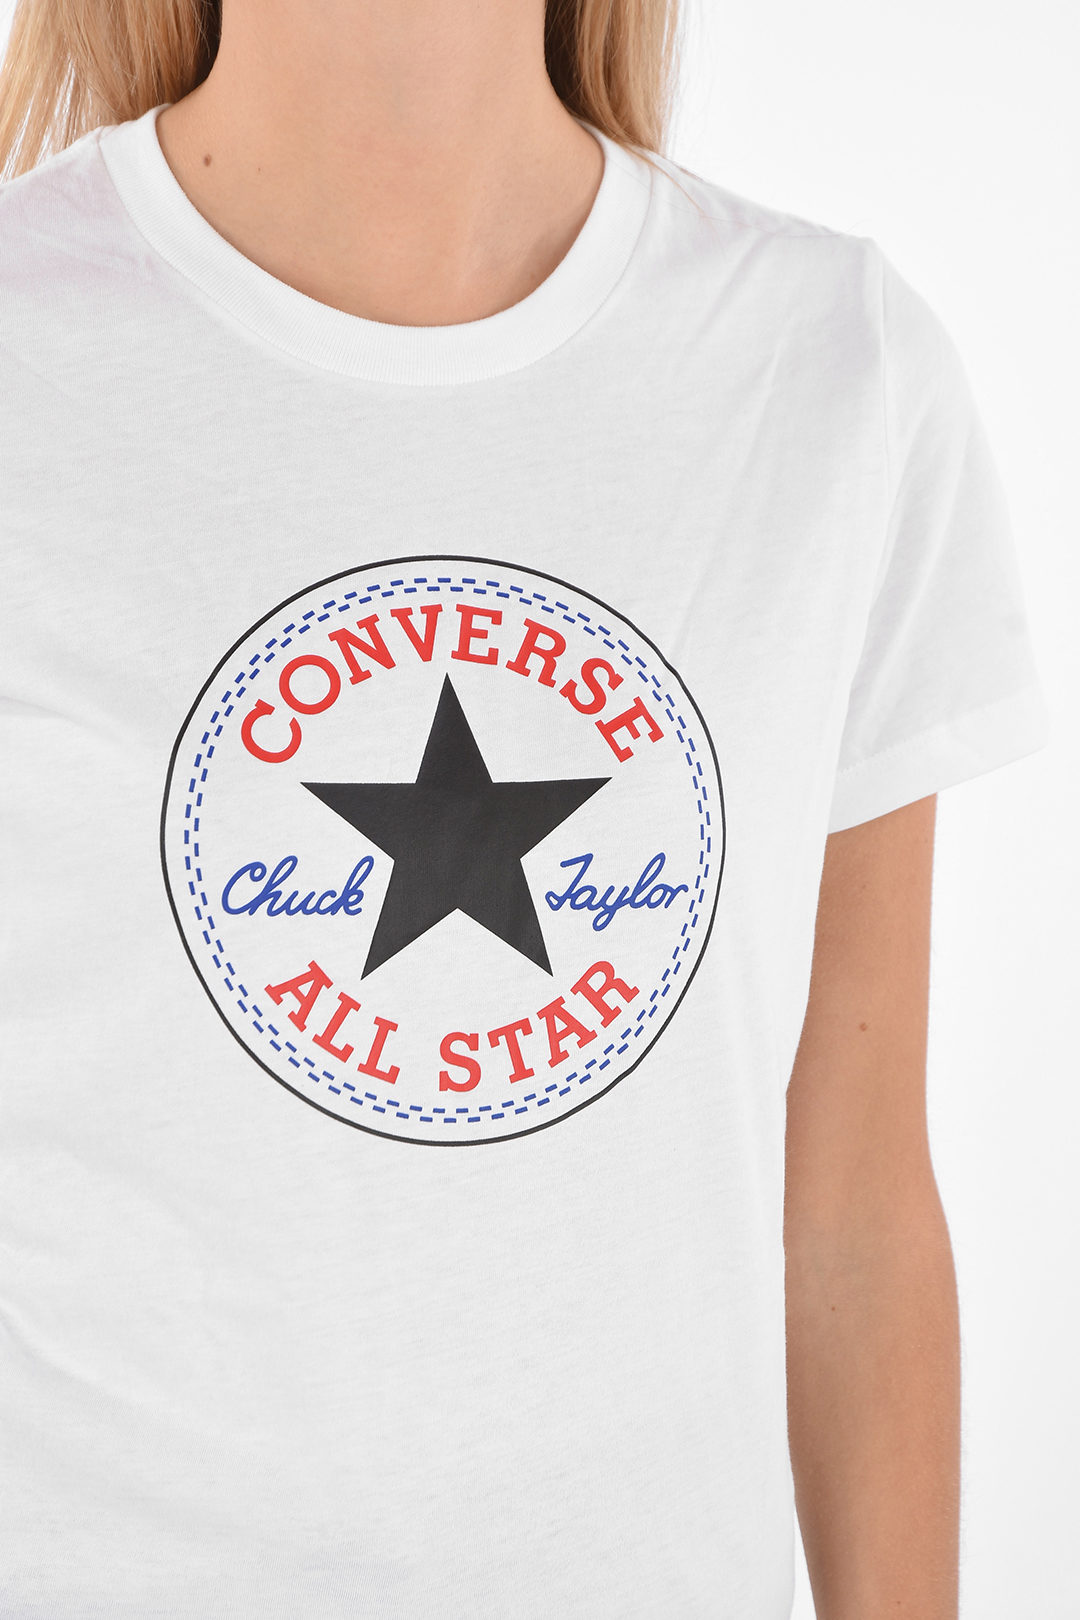 lippen Attent Maladroit Converse ALL STAR Printed T-shirt women - Glamood Outlet